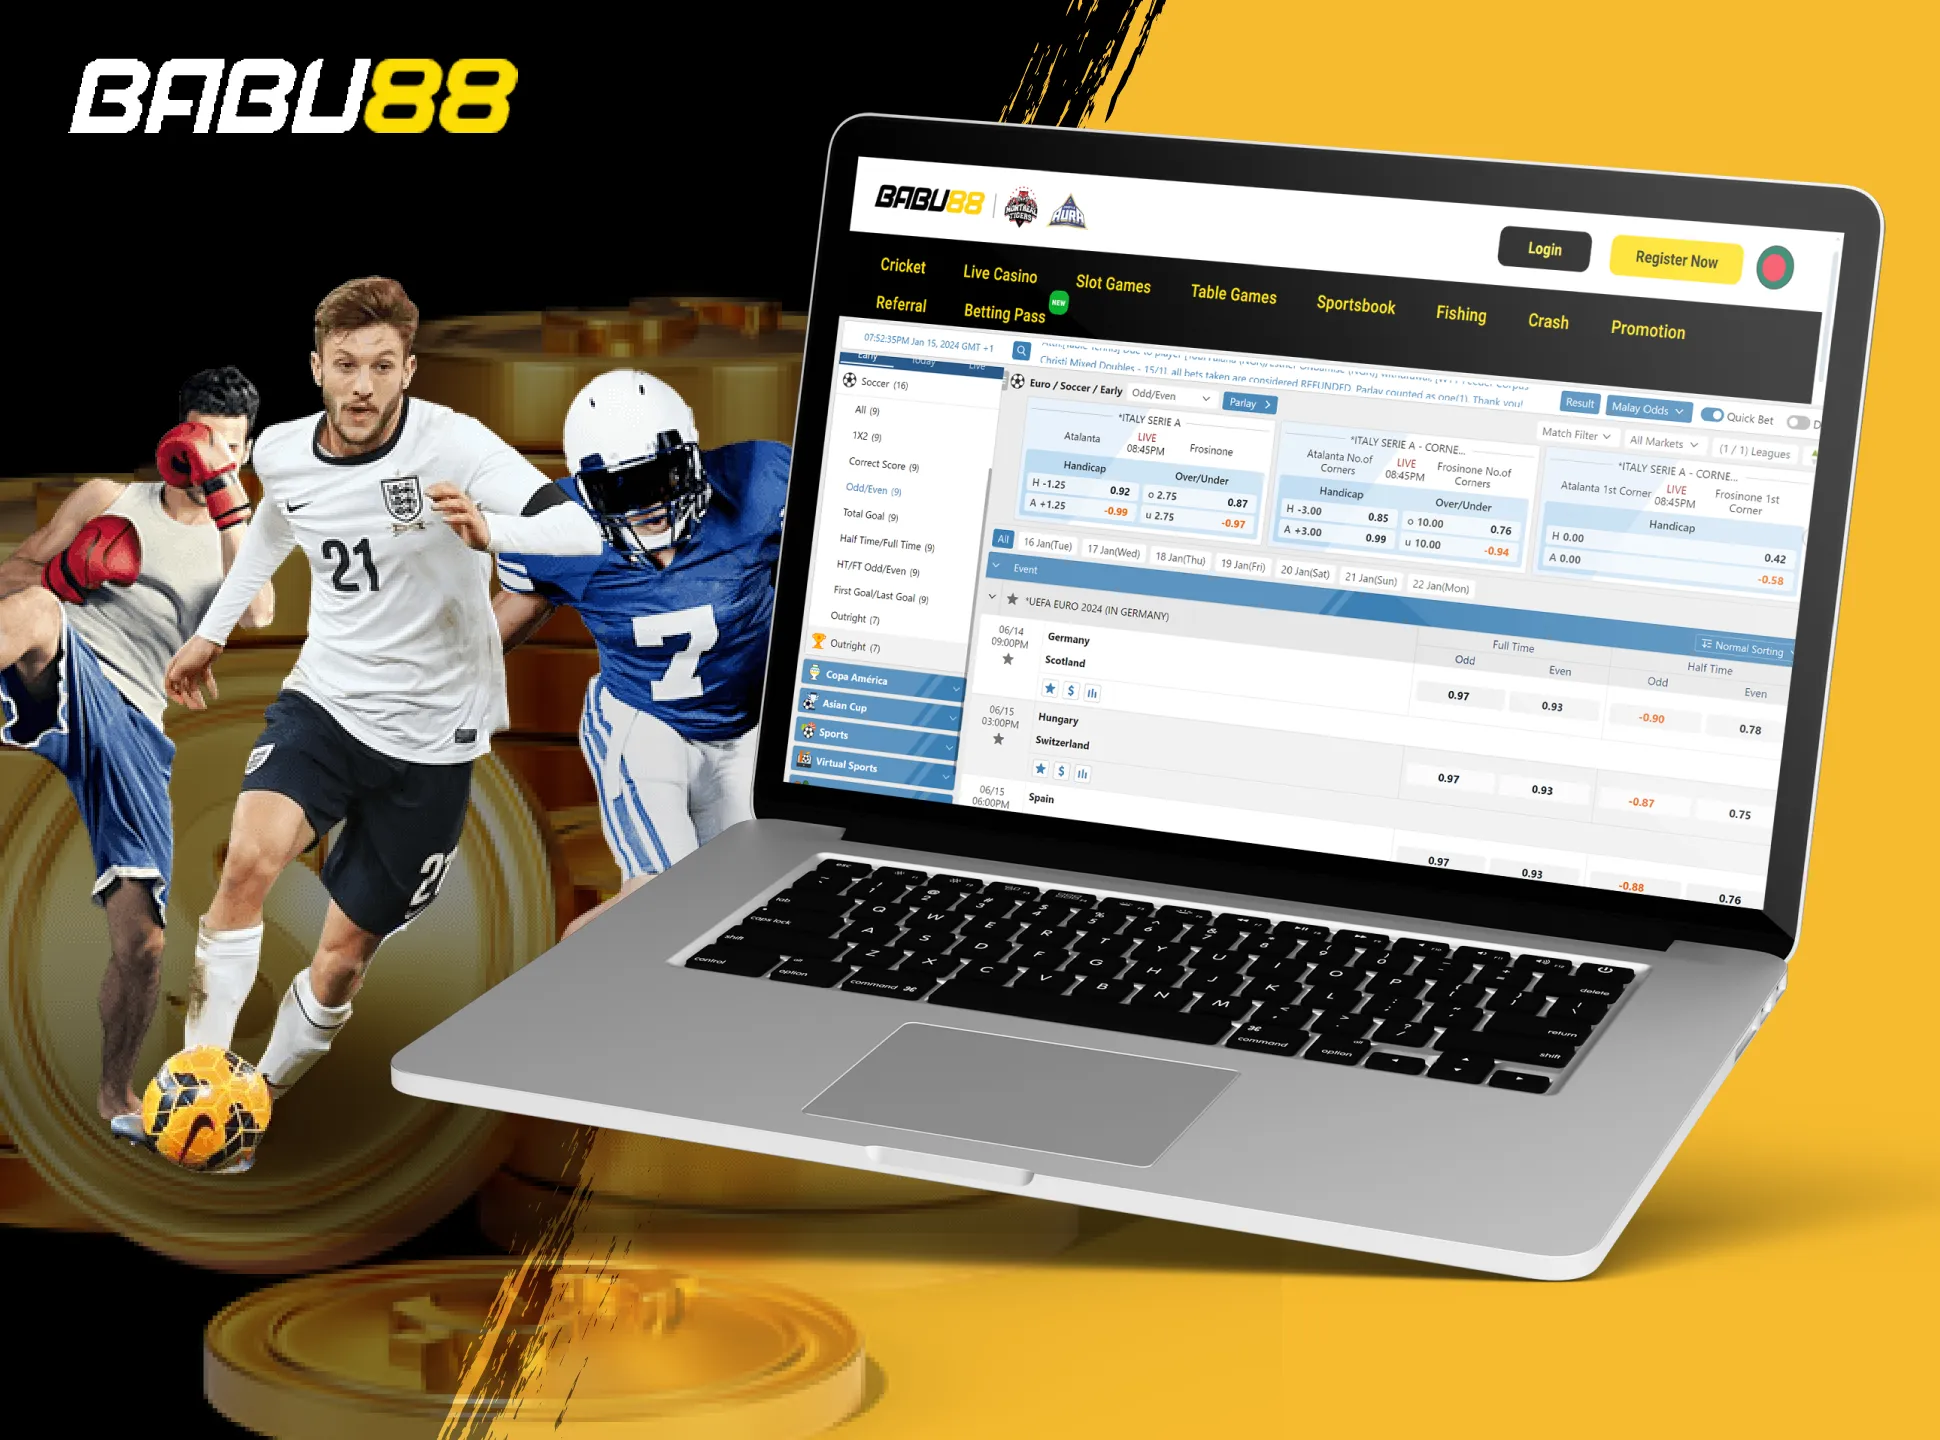 Place single or system bets according to your betting skills.